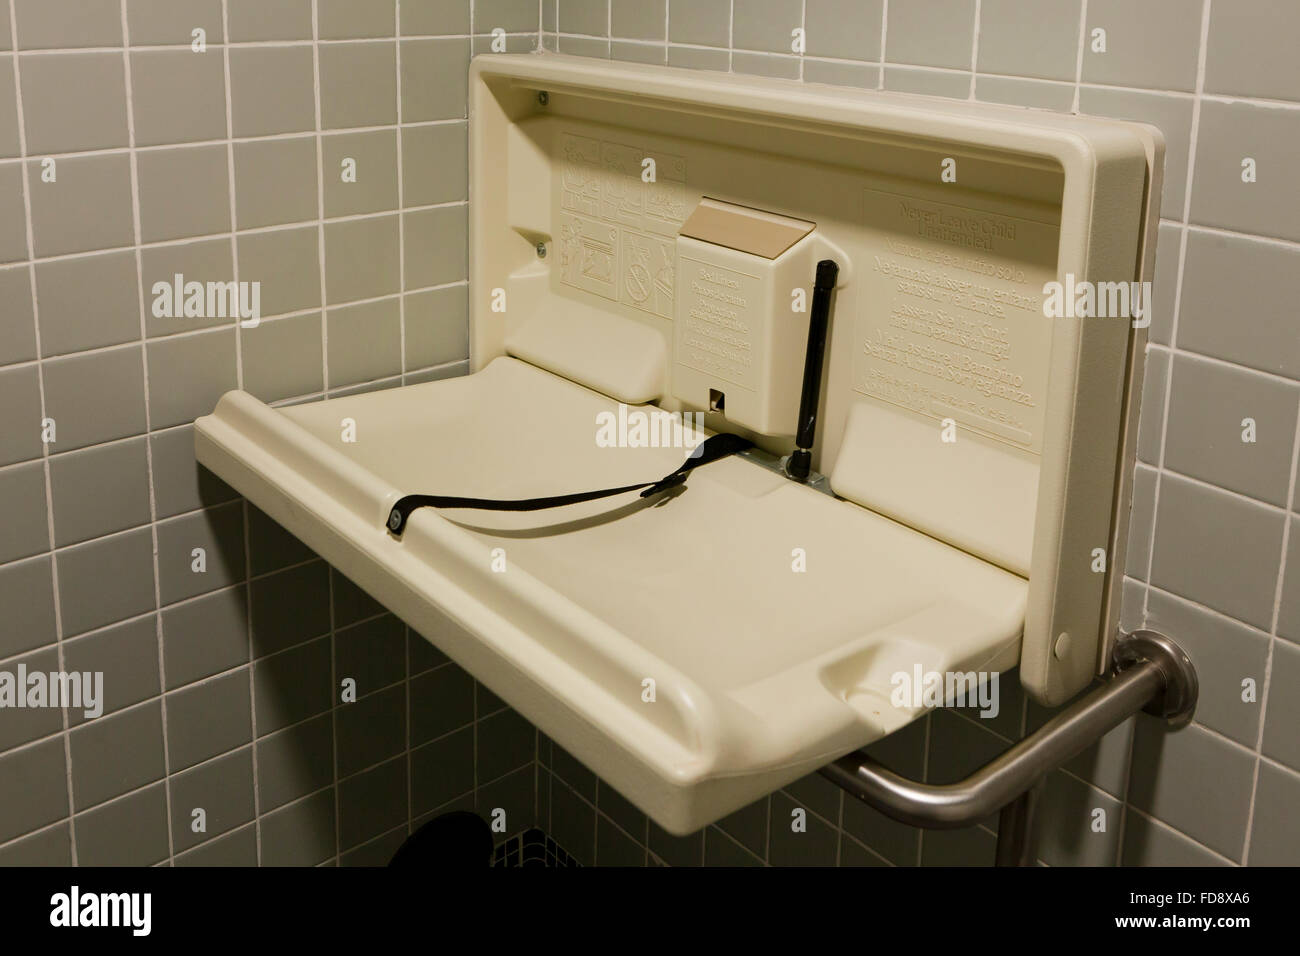 baby changing table for public bathrooms